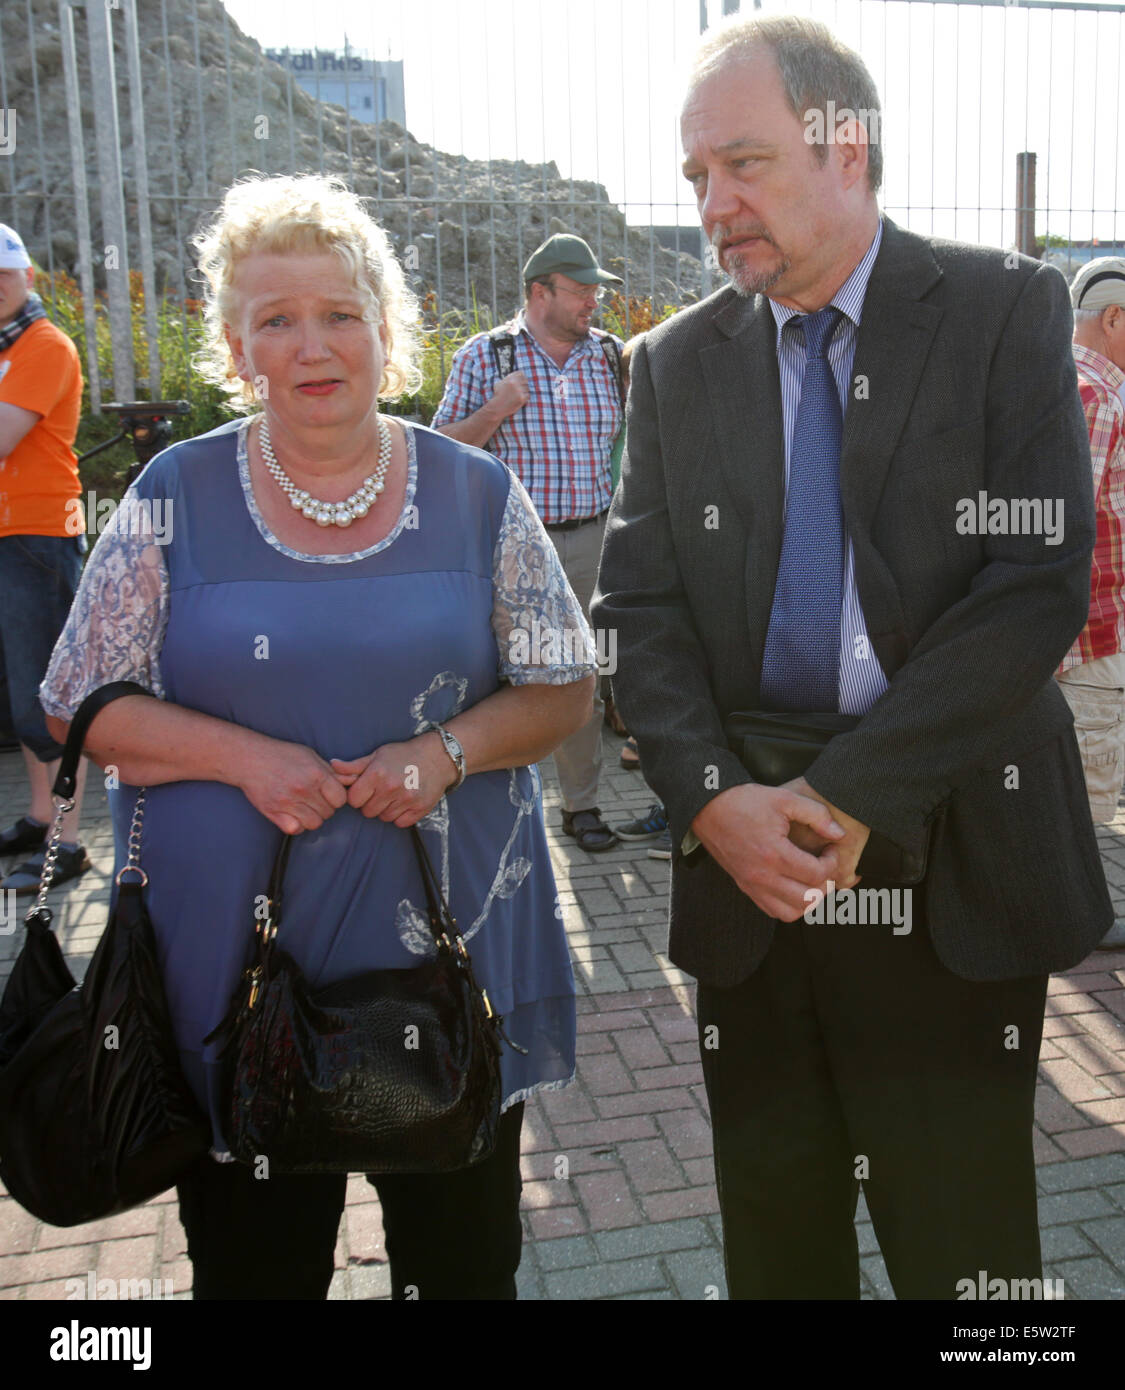 Rostock-Warnemuende, Germany. 06th Aug, 2014. The parents of Jenny Boeken, who was killed in an accident on board of the 'Gorch Fock', Marlis and Uwe Boeken, stand at the passenger quay in Rostock-Warnemuende, Germany, 06 August 2014. Representatives of the administrative court Aachen are going to investigate on site if there was a particular danger of life during the service practice. The parents claimed for indemnification of 40,000 euros from the Federal Republic of Germany. Photo: Bernd Wuestneck/dpa/Alamy Live News Stock Photo